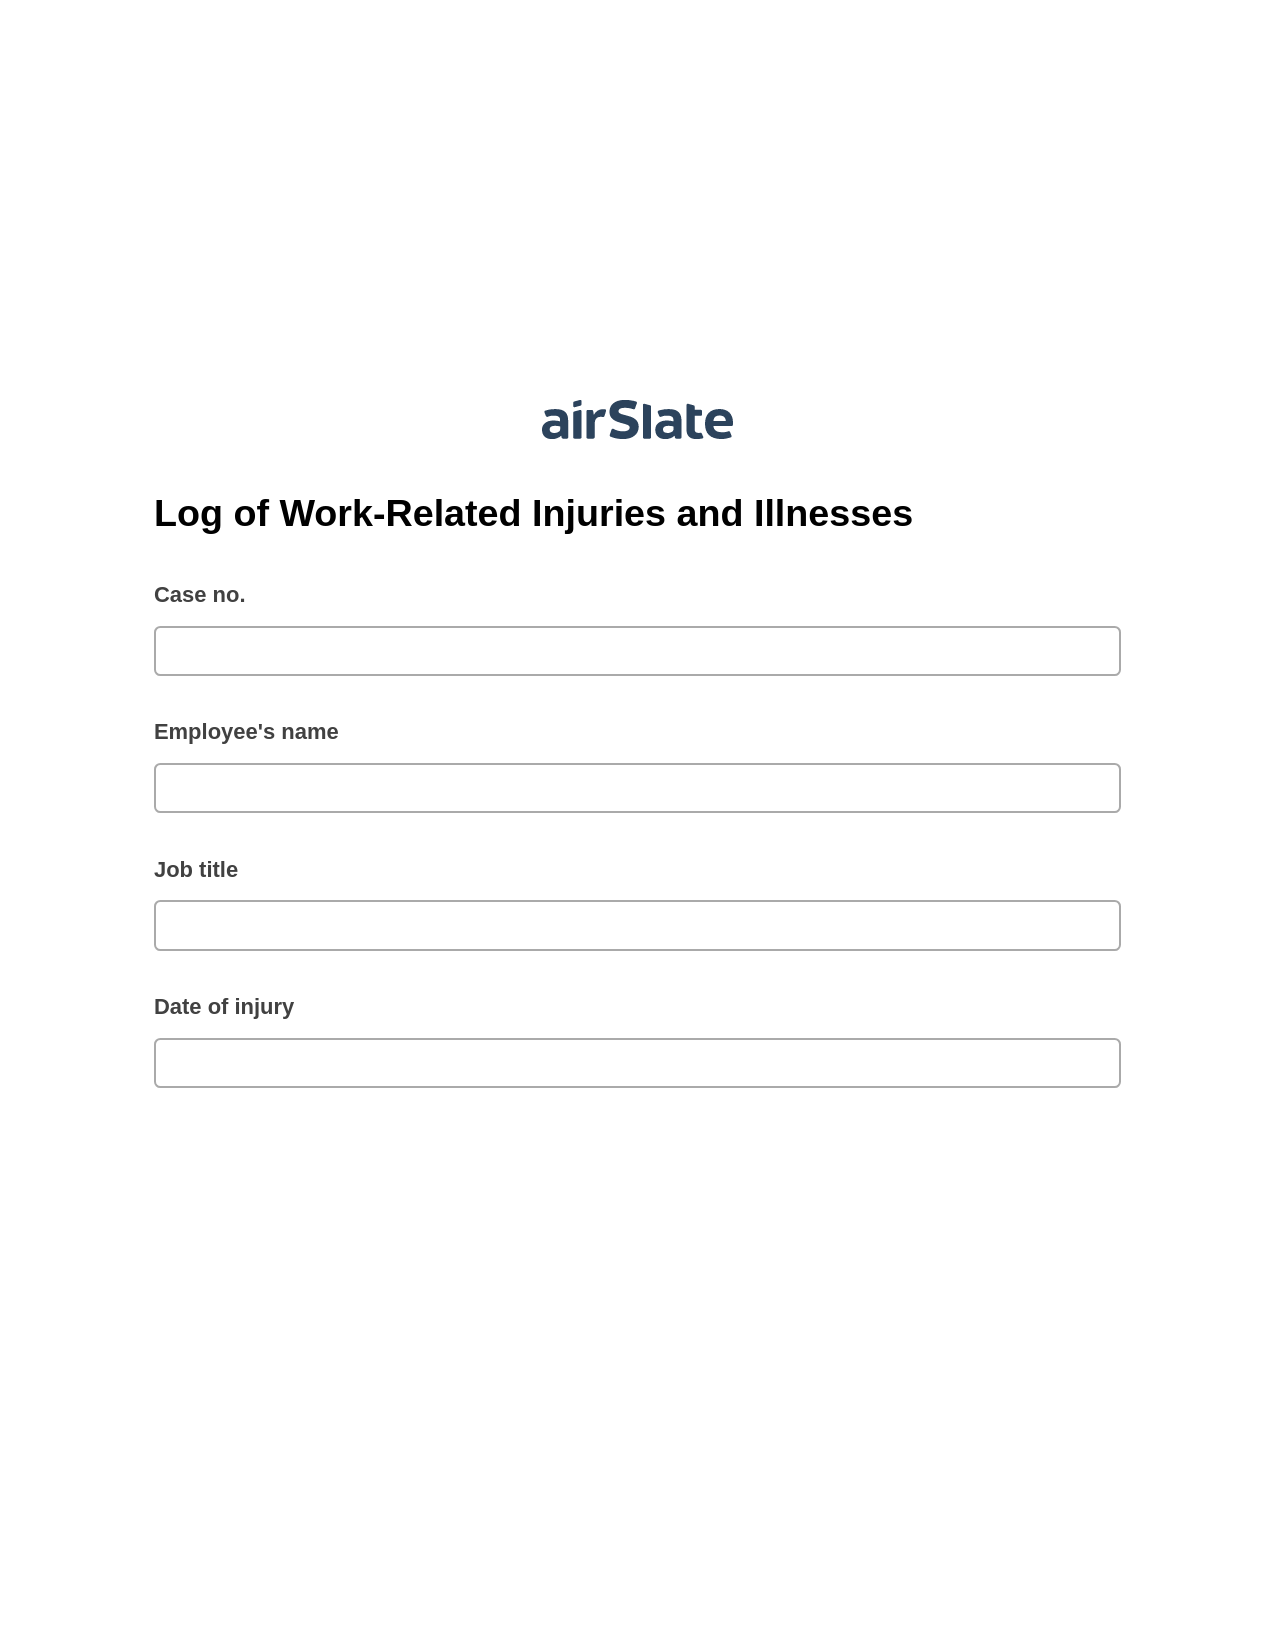 Log of Work-Related Injuries and Illnesses Pre-fill from NetSuite Records Bot, Unassign Role Bot, Export to Formstack Documents Bot